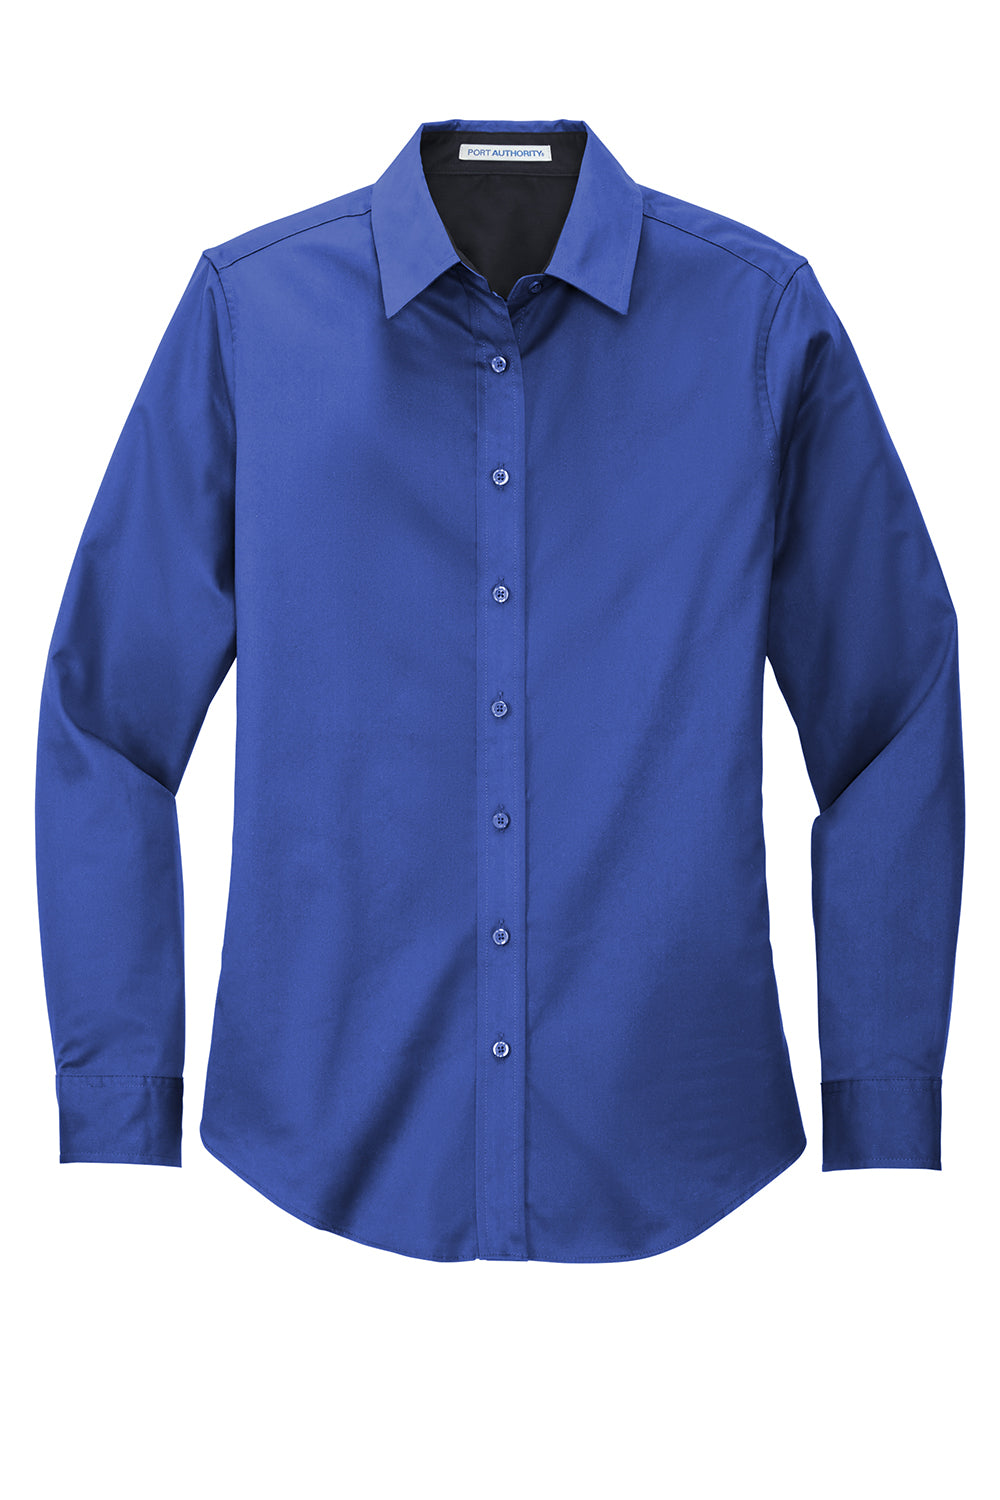 Port Authority L608 Womens Easy Care Wrinkle Resistant Long Sleeve Button Down Shirt Royal Blue Flat Front